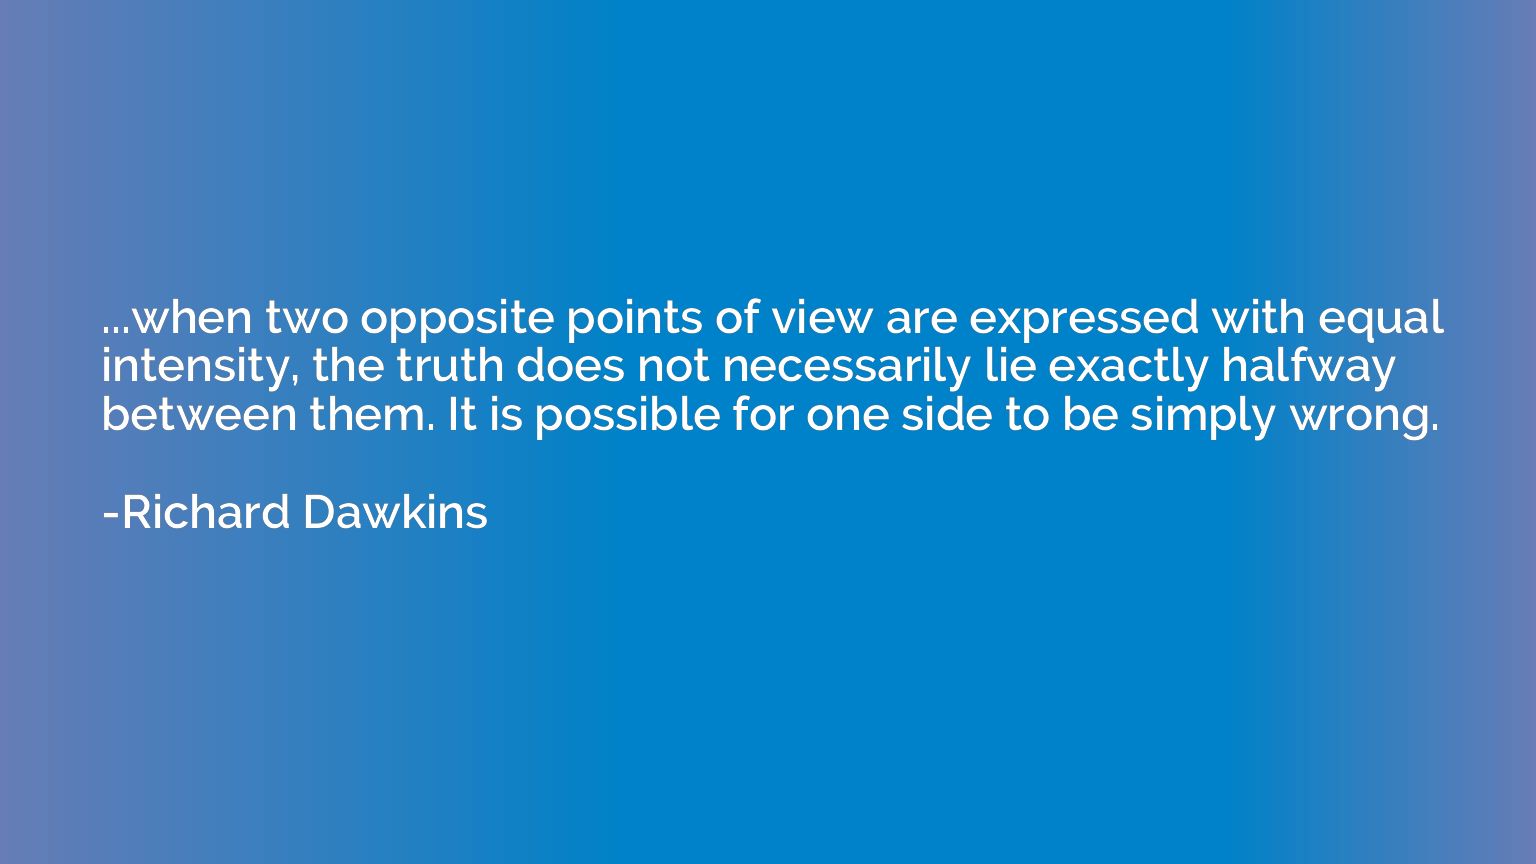 ...when two opposite points of view are expressed with equal